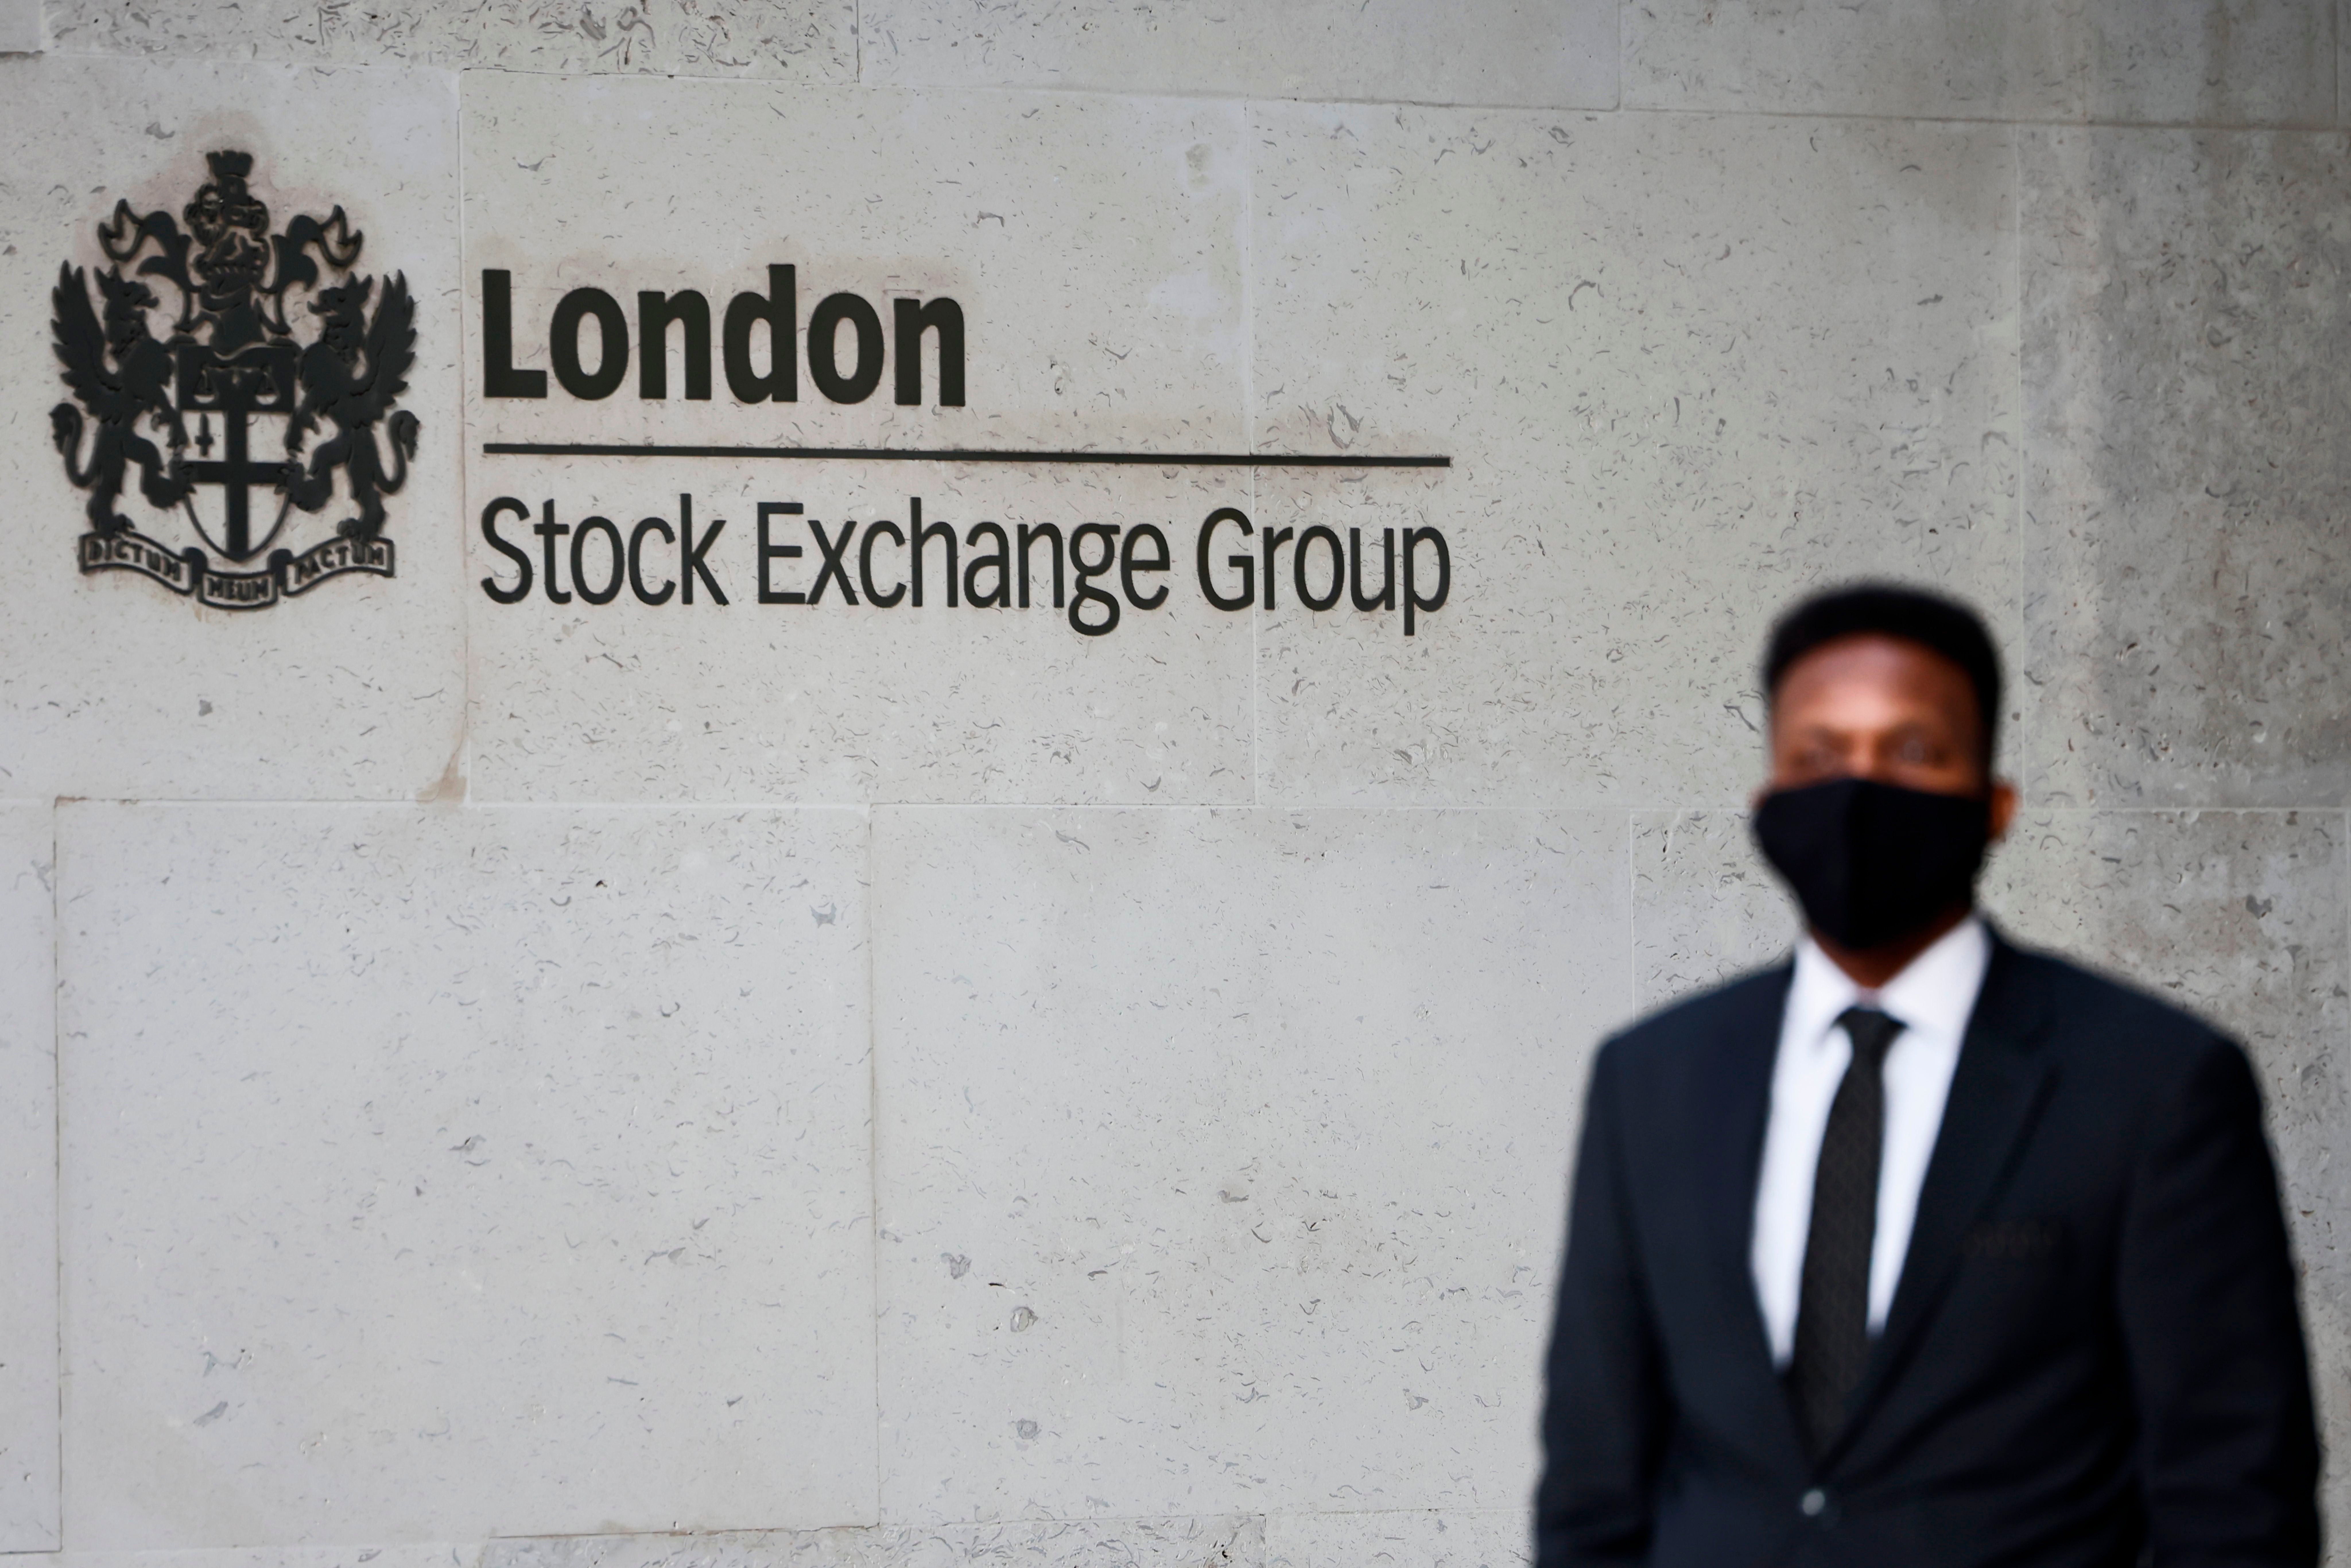 London stocks end the week slightly lower, however, FTSE 100 remains above 7,000